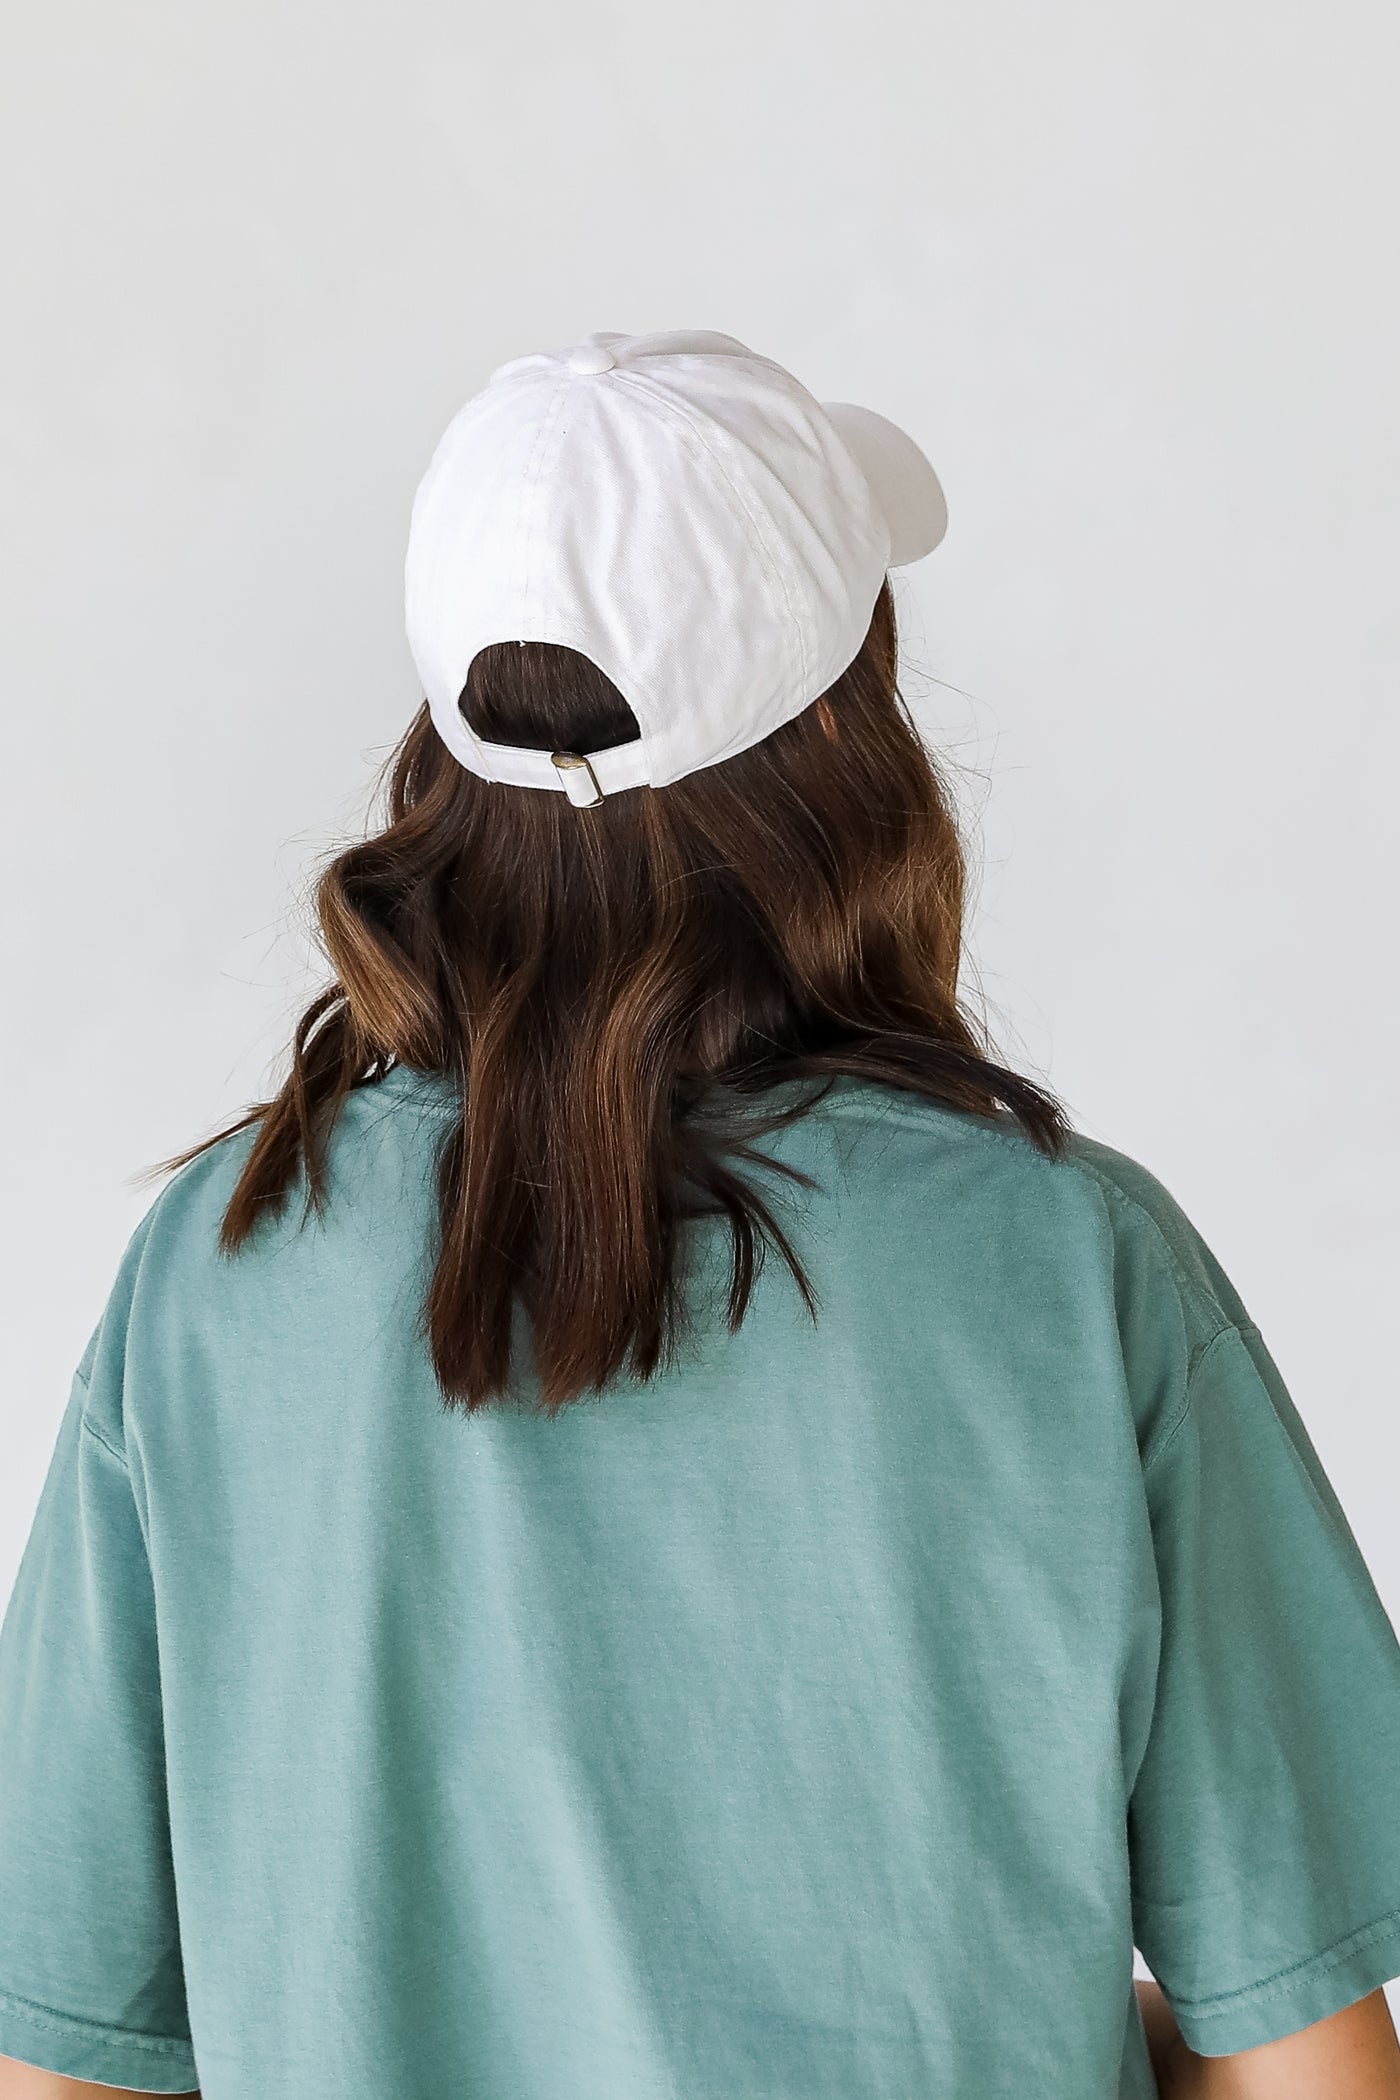 Savannah Embroidered Hat in white back view